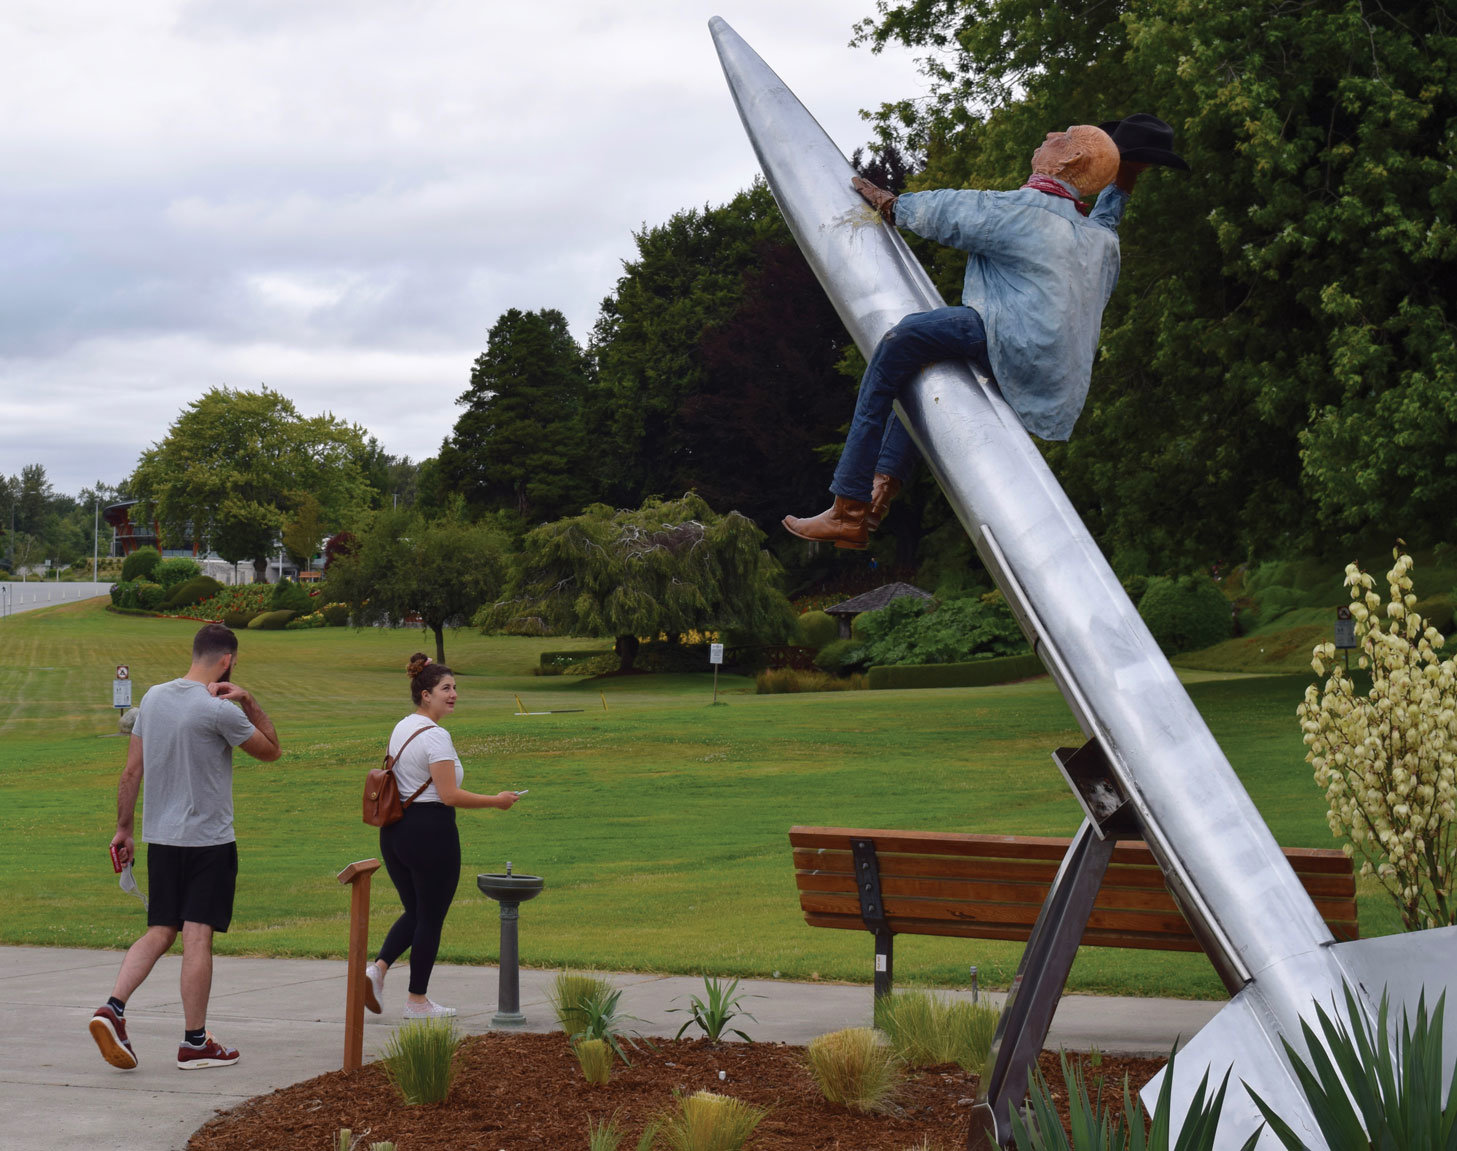 A piece titled “Rocketman” on display at Peace Arch Park as part of the annual exhibition. Artist Ron Simmer said in the exhibition brochure that the sculpture “symbolizes man’s urge to explore the world and the universe.”